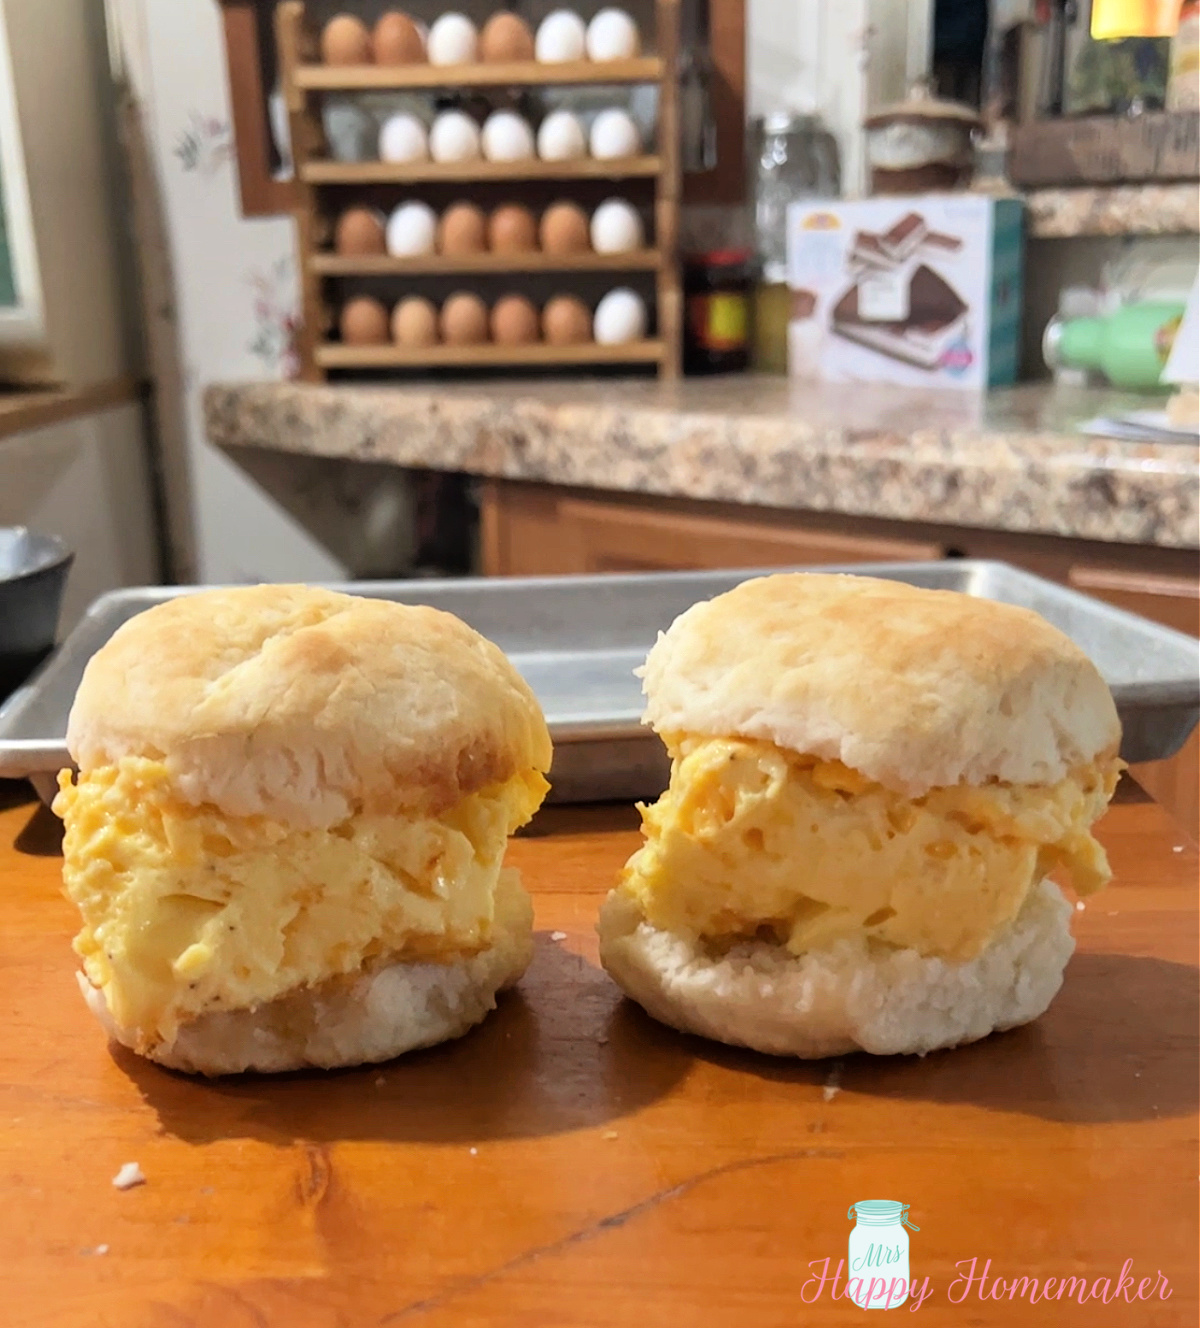 Two baked egg breakfast biscuit sandwiches sitting on a wooden counter 